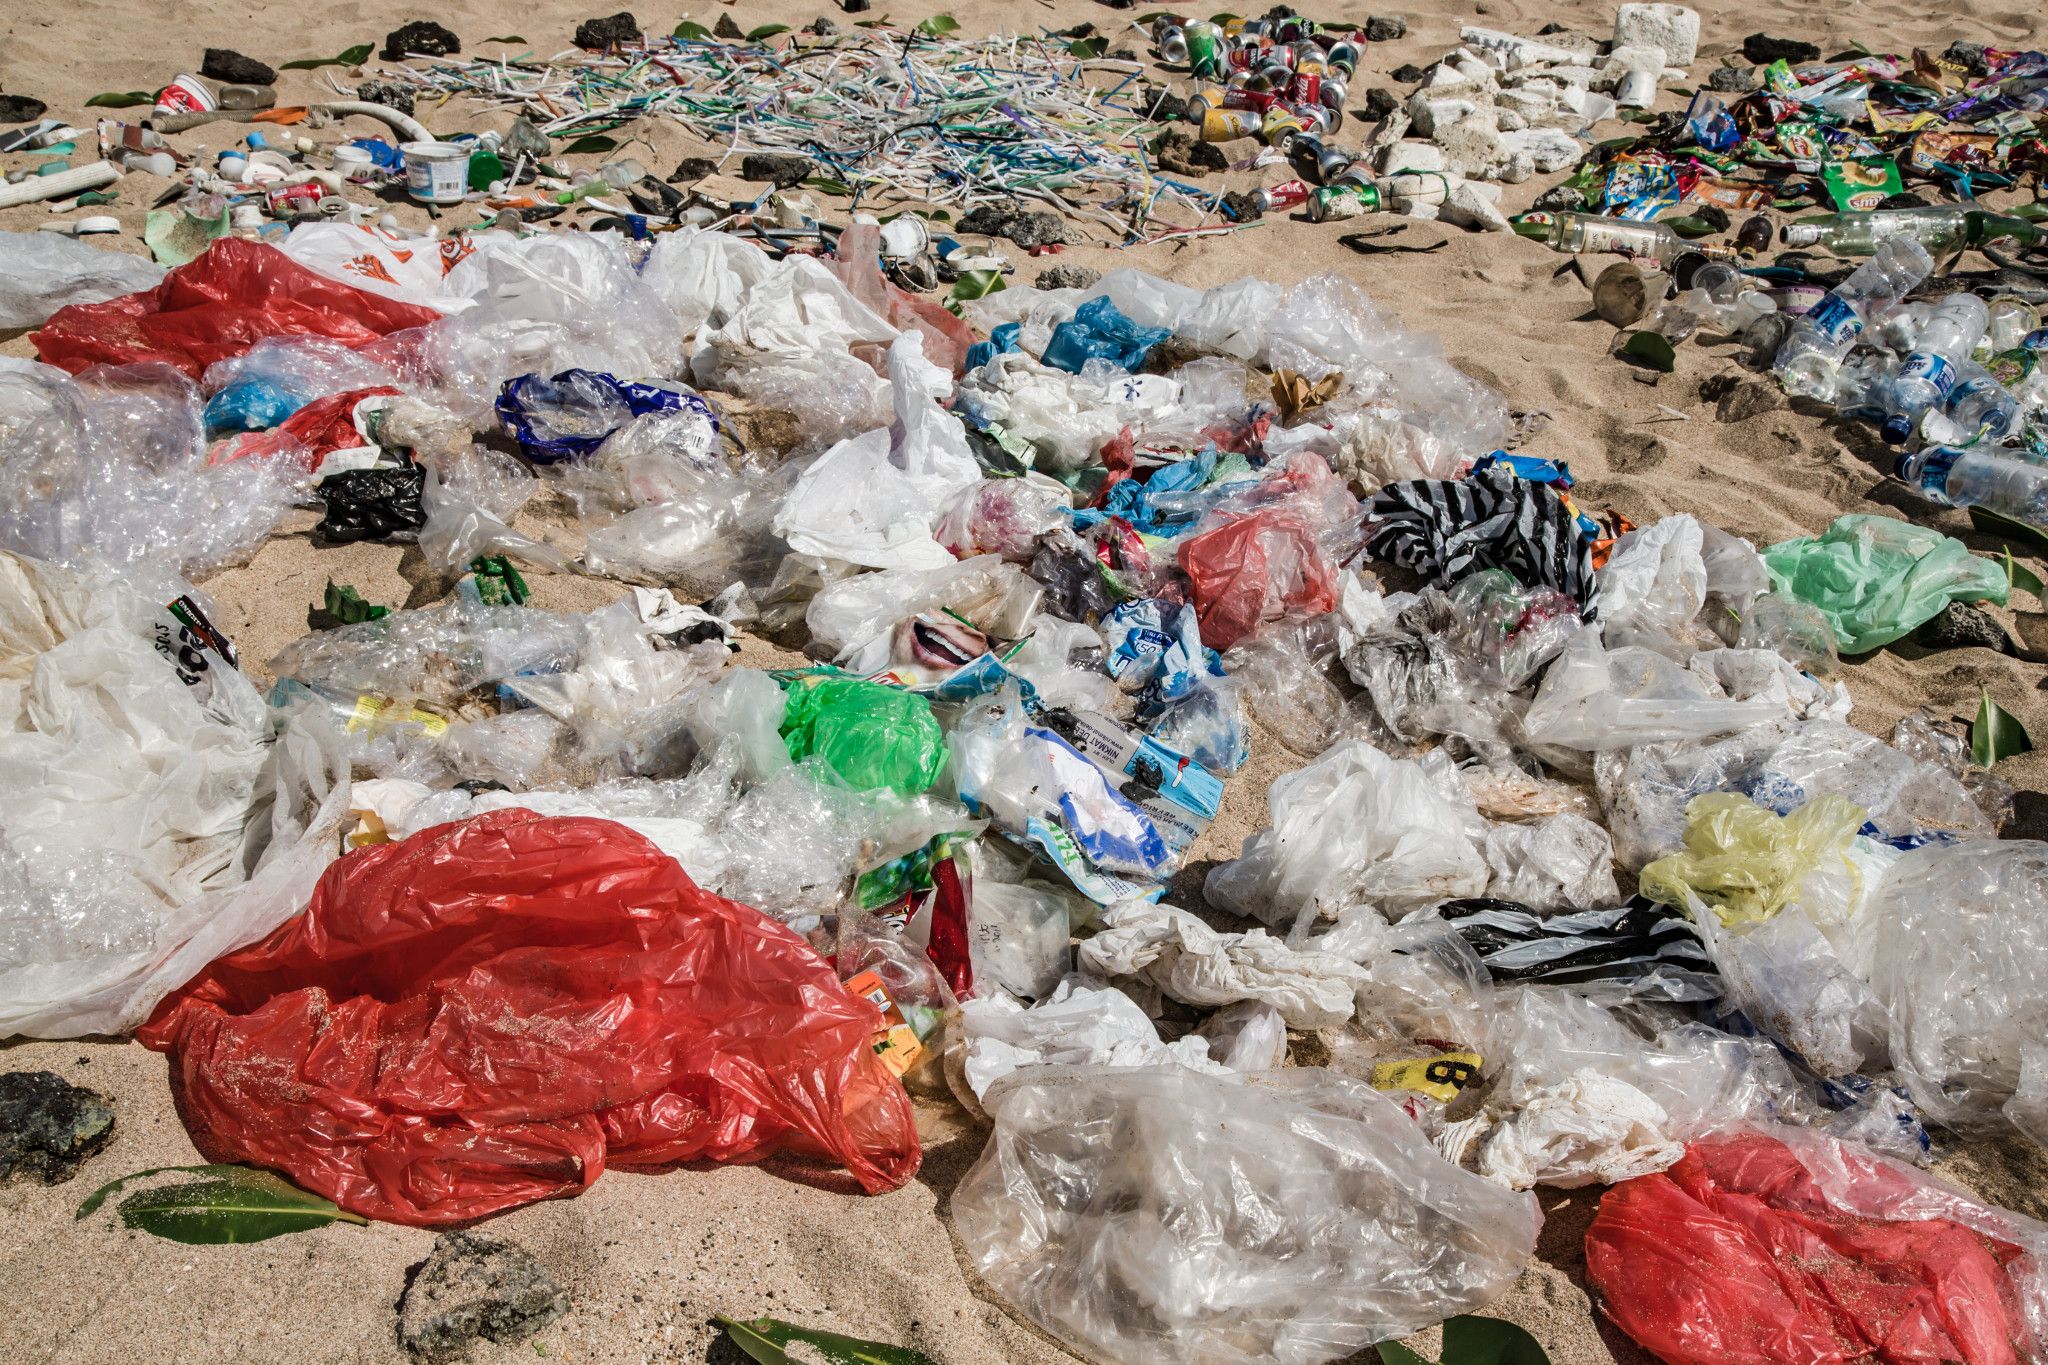 Circular solutions to the plastic pollution crisis